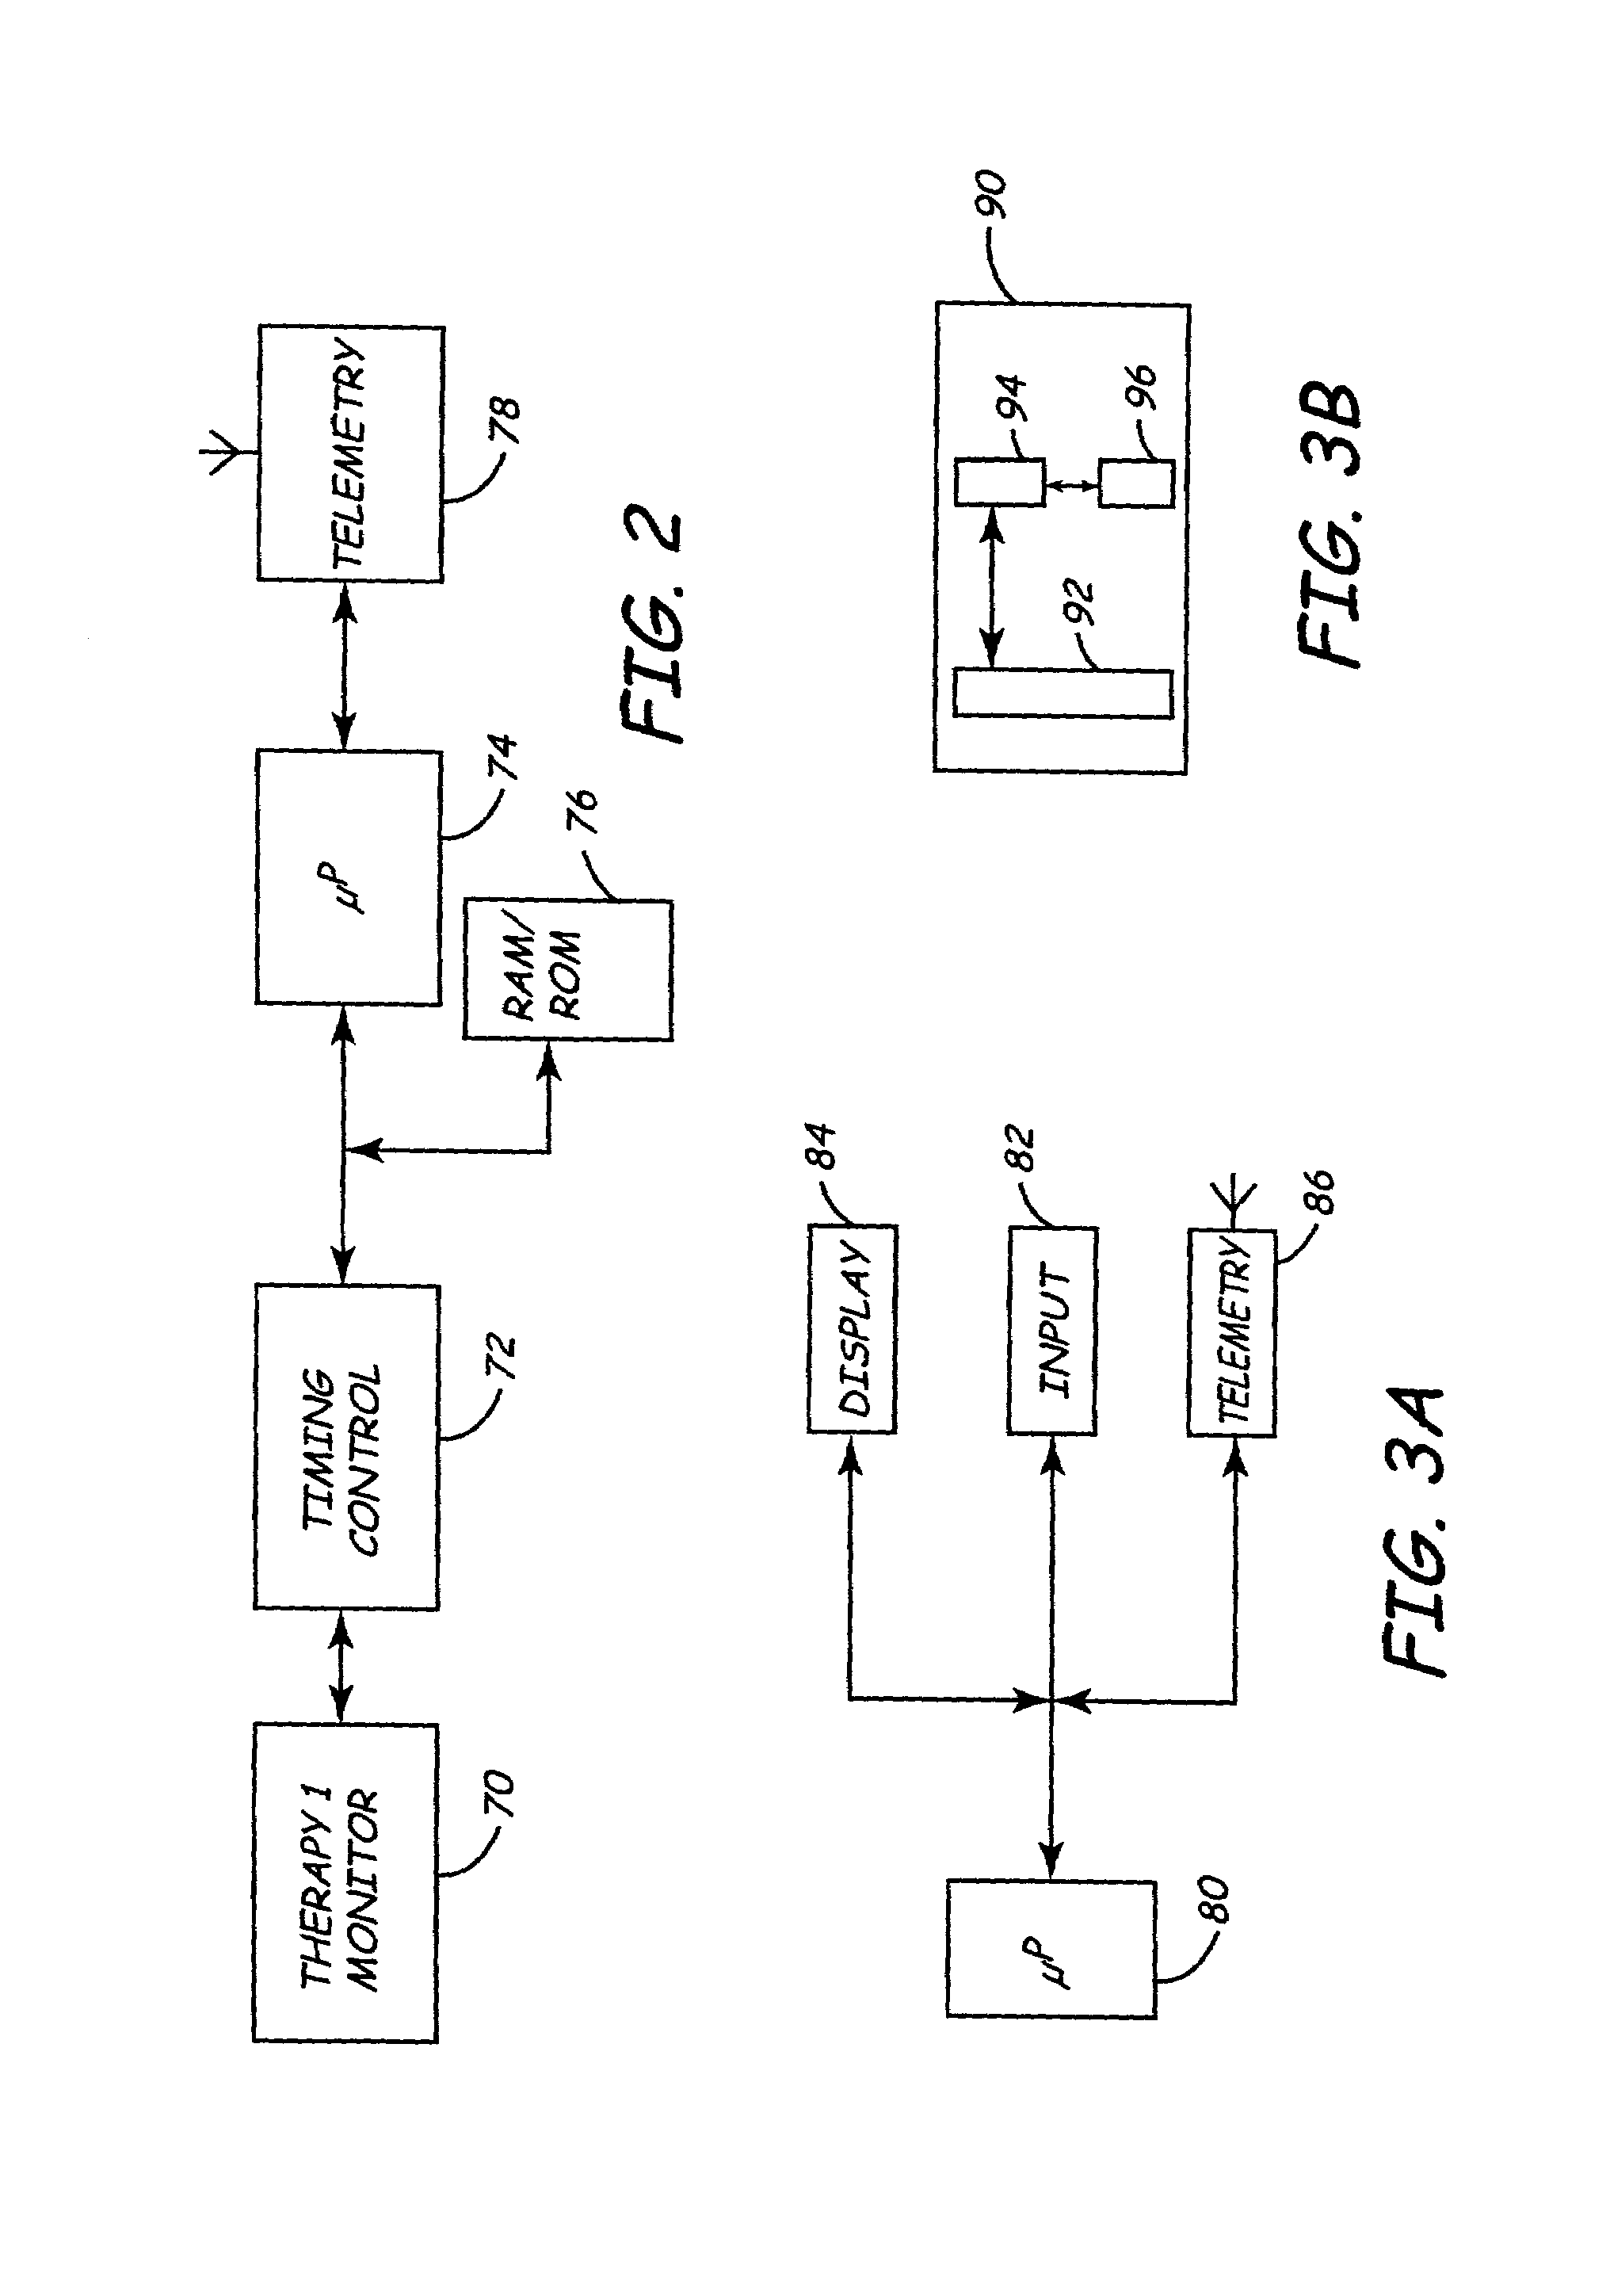 Apparatus and method for automated invoicing of medical device systems